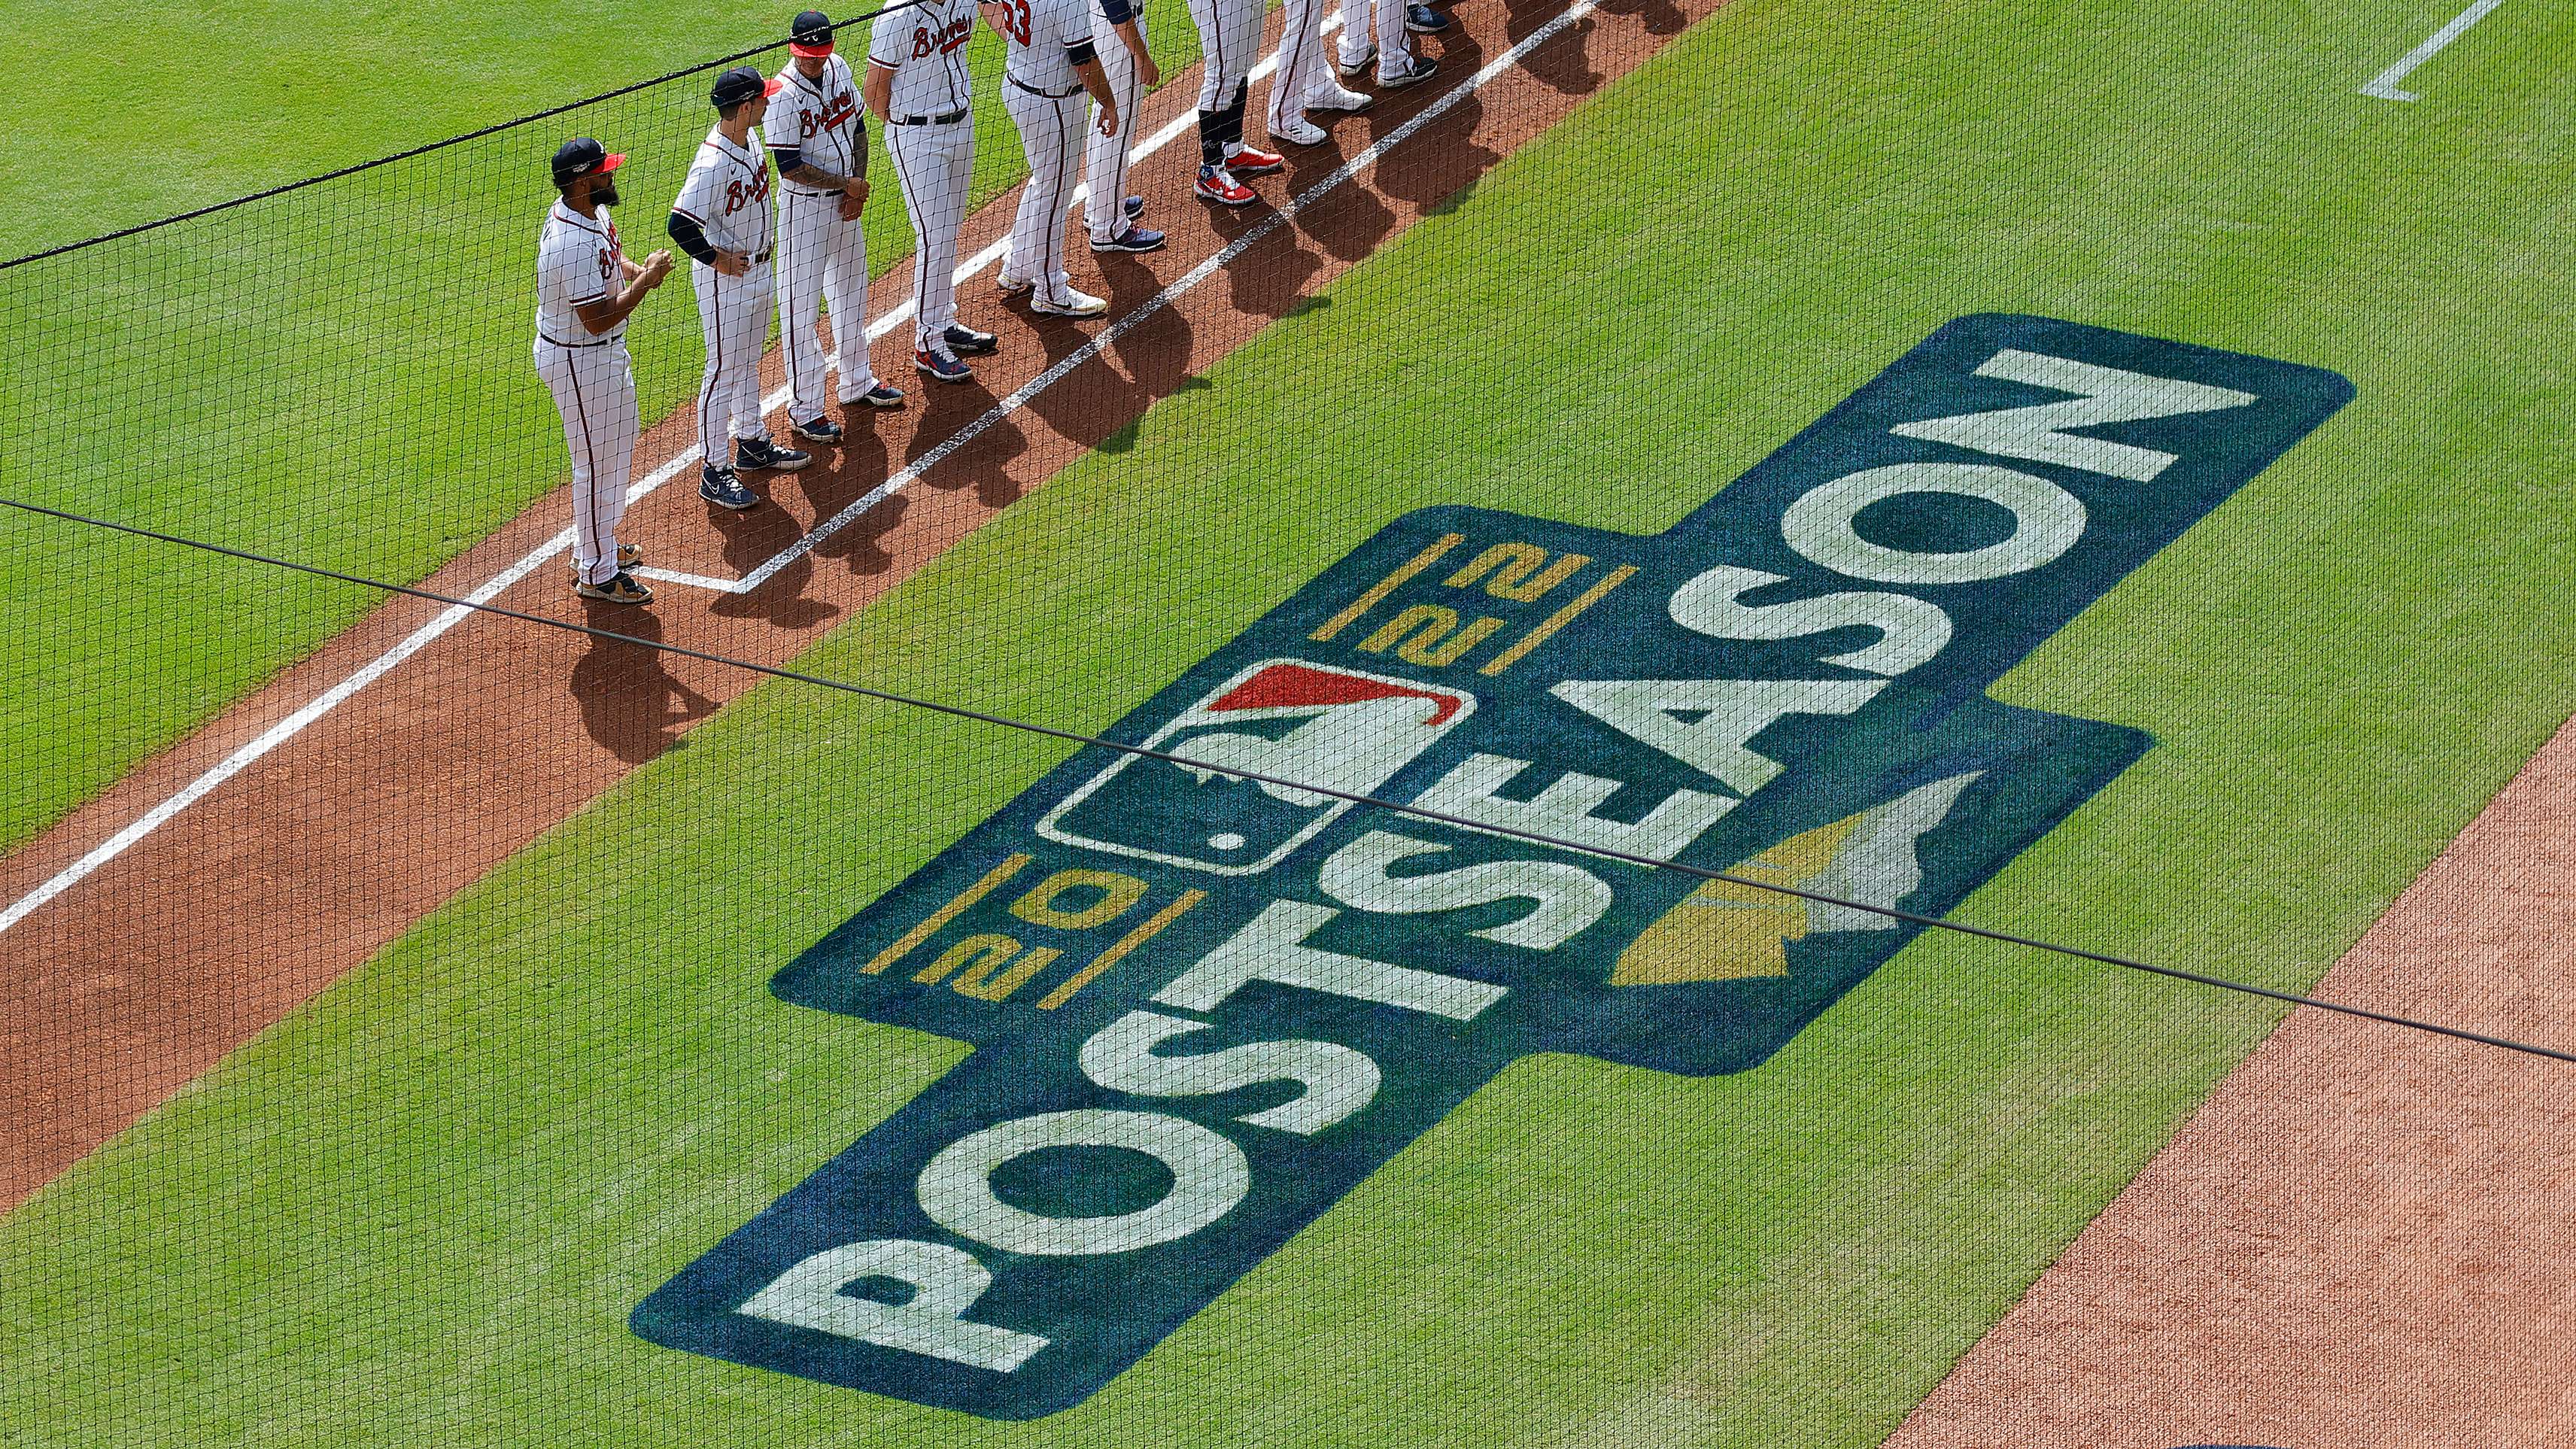 What you need to know about the MLB postseason schedule